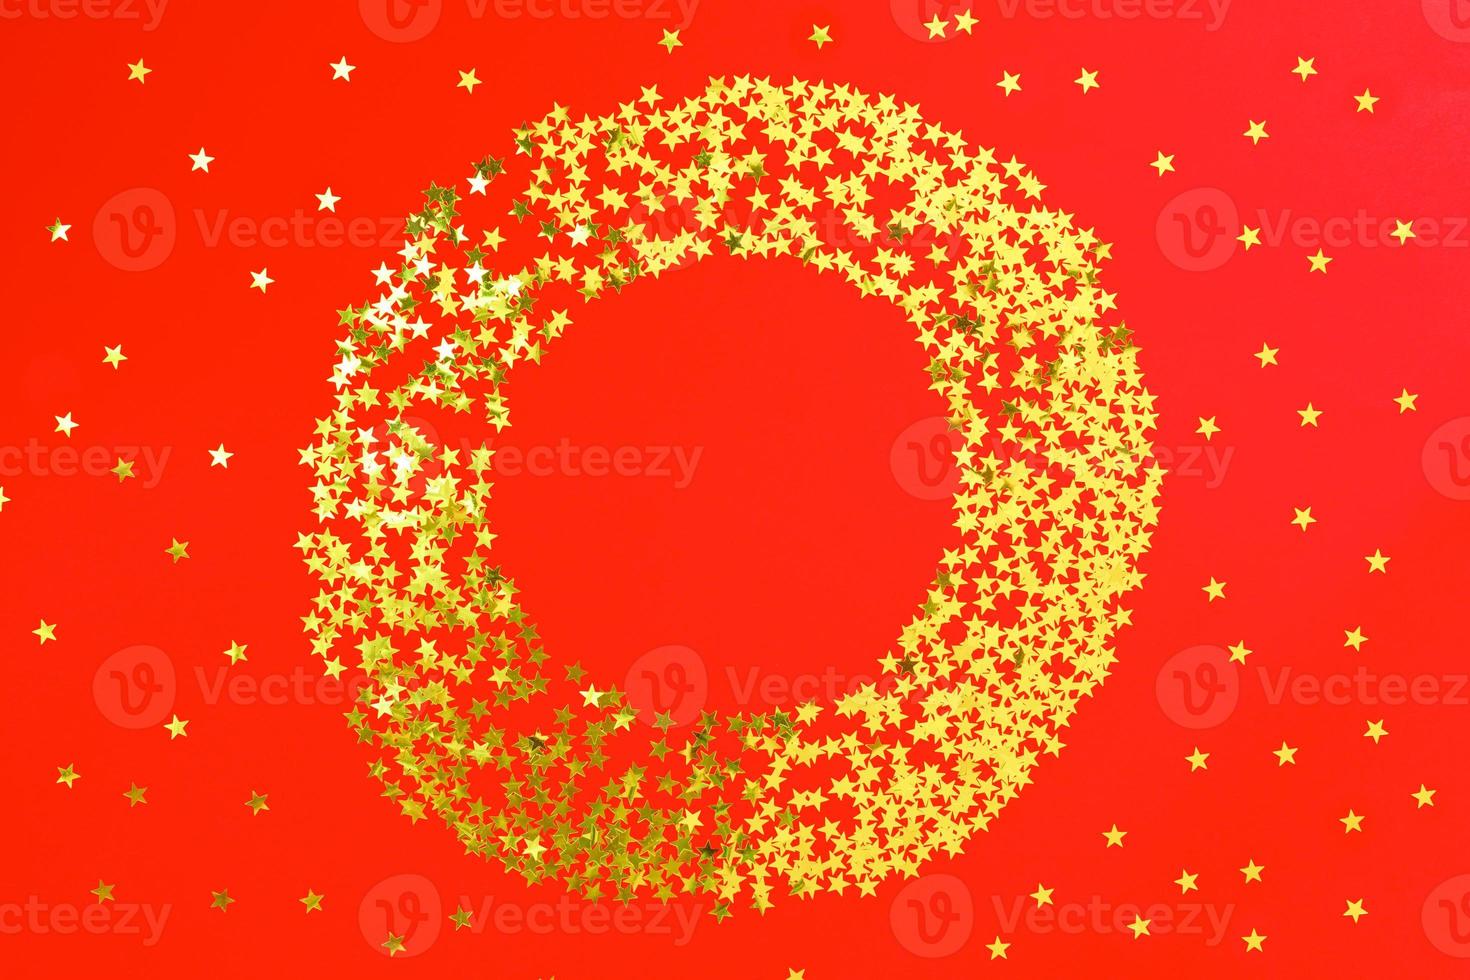 Red backdrop with glitter and golden stars confetti in circle. Festive holiday bright background photo